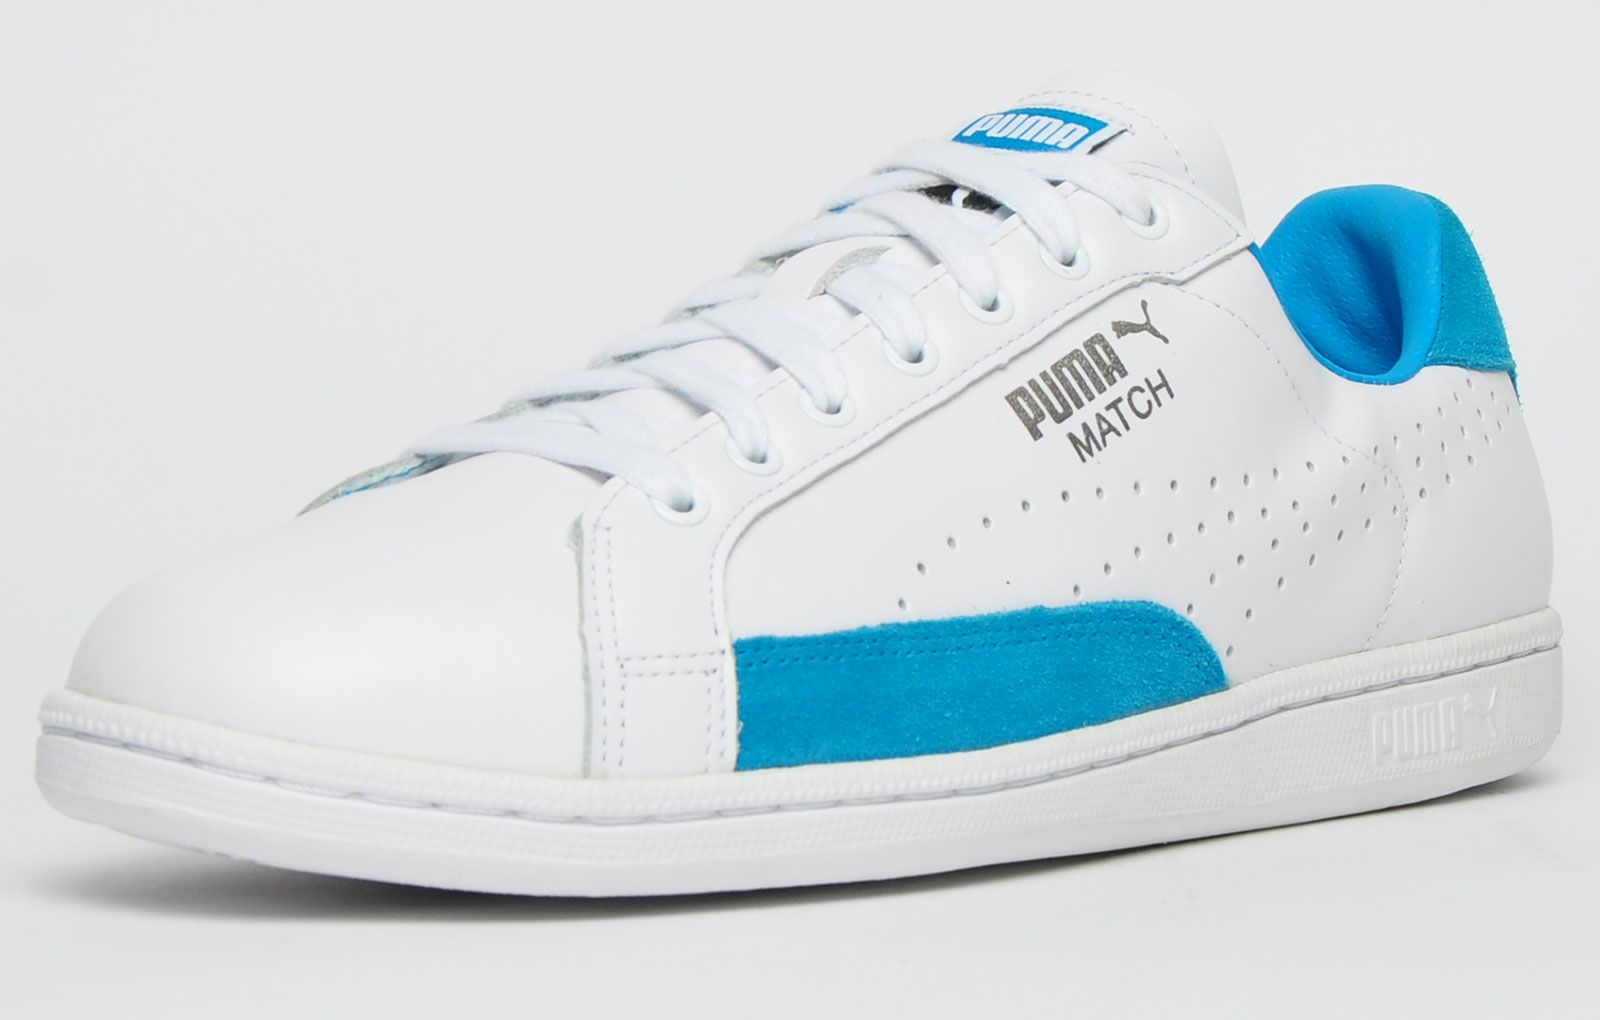 The Puma Match 74 UPC from the iconic 1974 tennis collection features a soft leather upper with side perforations for breathability with the addition of suede panelling to the sides and heel with silver Puma branding to the side to complete the look. <p>The Match 74 men’s shoe is finished off with a durable rubber sole with a textured vintage styled finish which will provide stability and grip on all surfaces and with a slimmed down look to give that sporty designer feel</p> <p class=